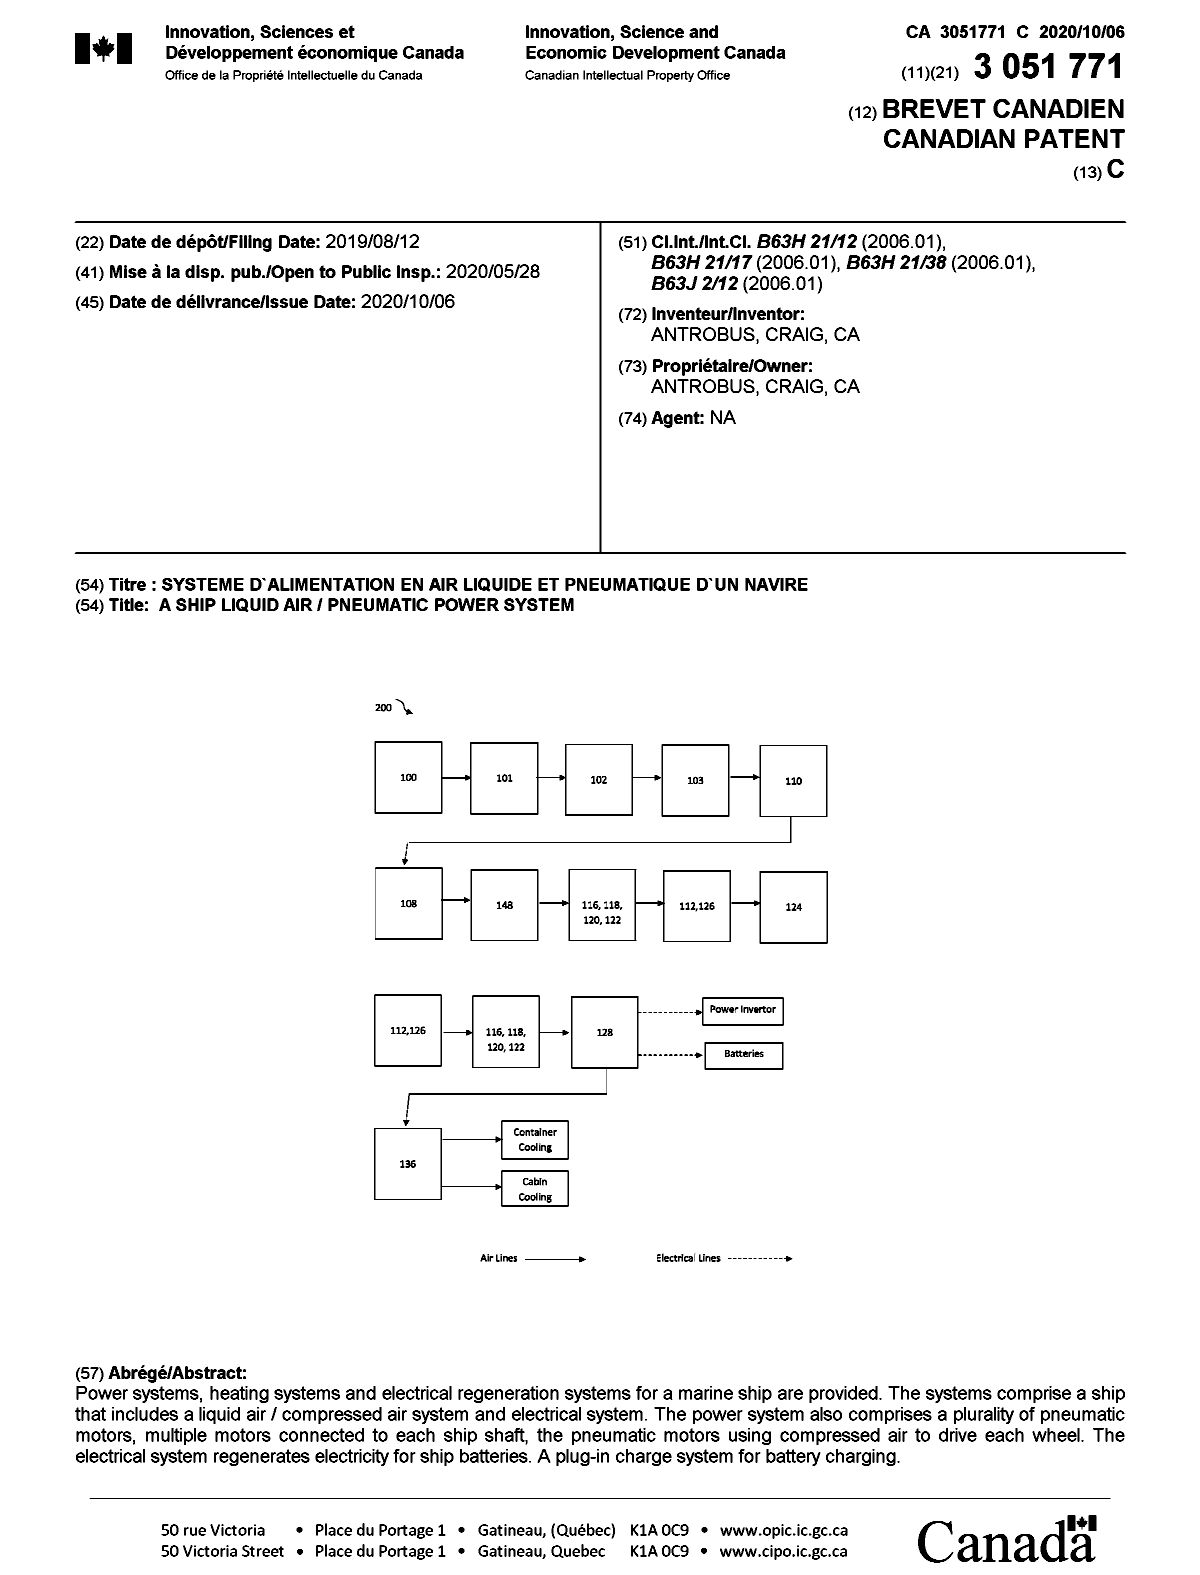 Canadian Patent Document 3051771. Cover Page 20200908. Image 1 of 1